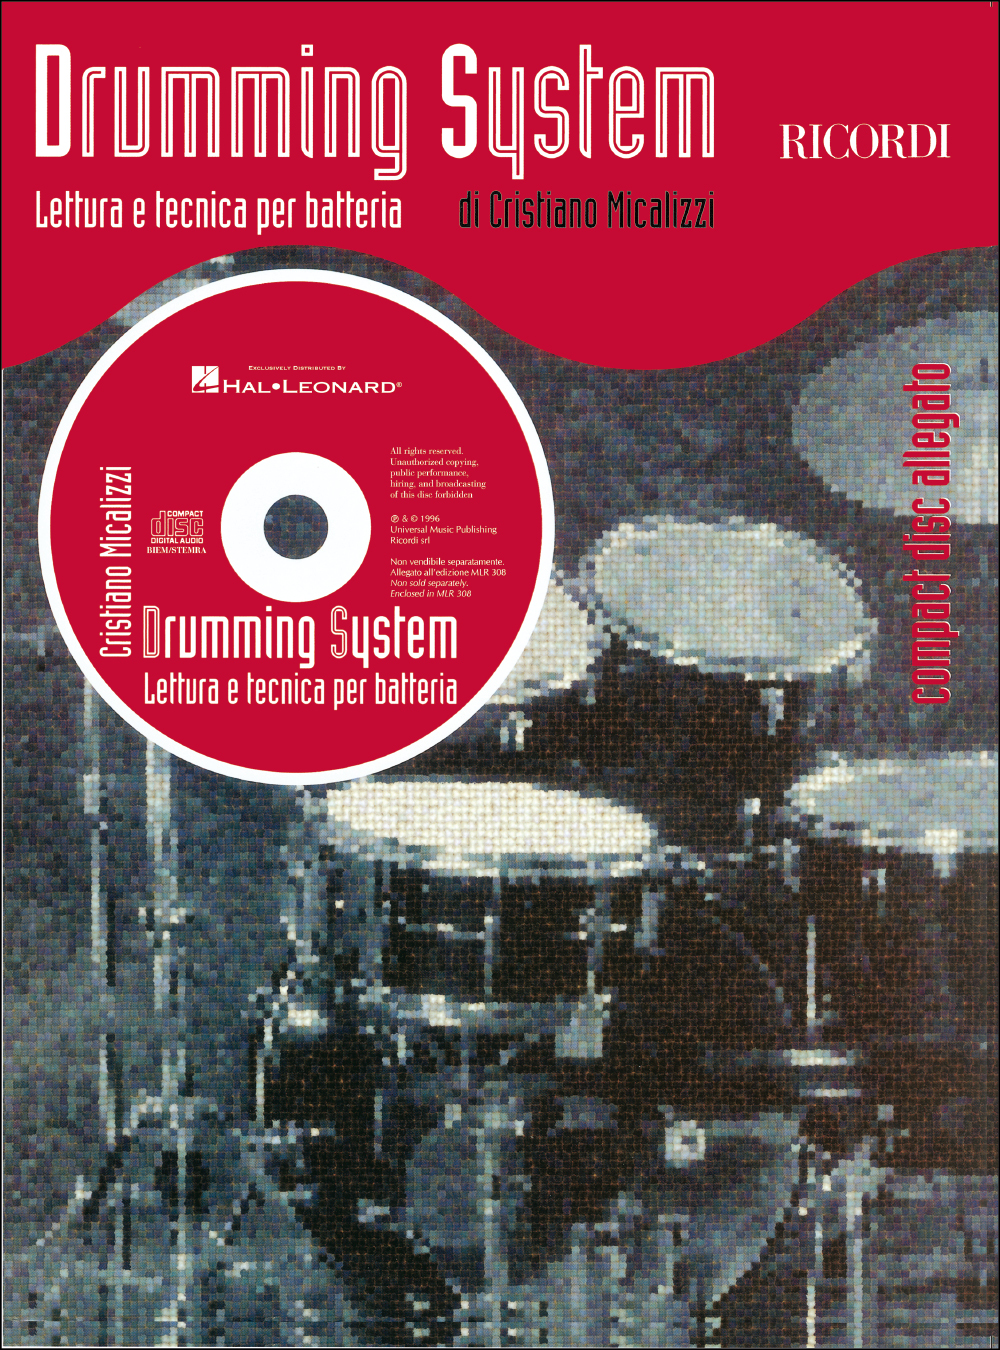 Cristiano Micalizzi: Drumming System: Drum Kit